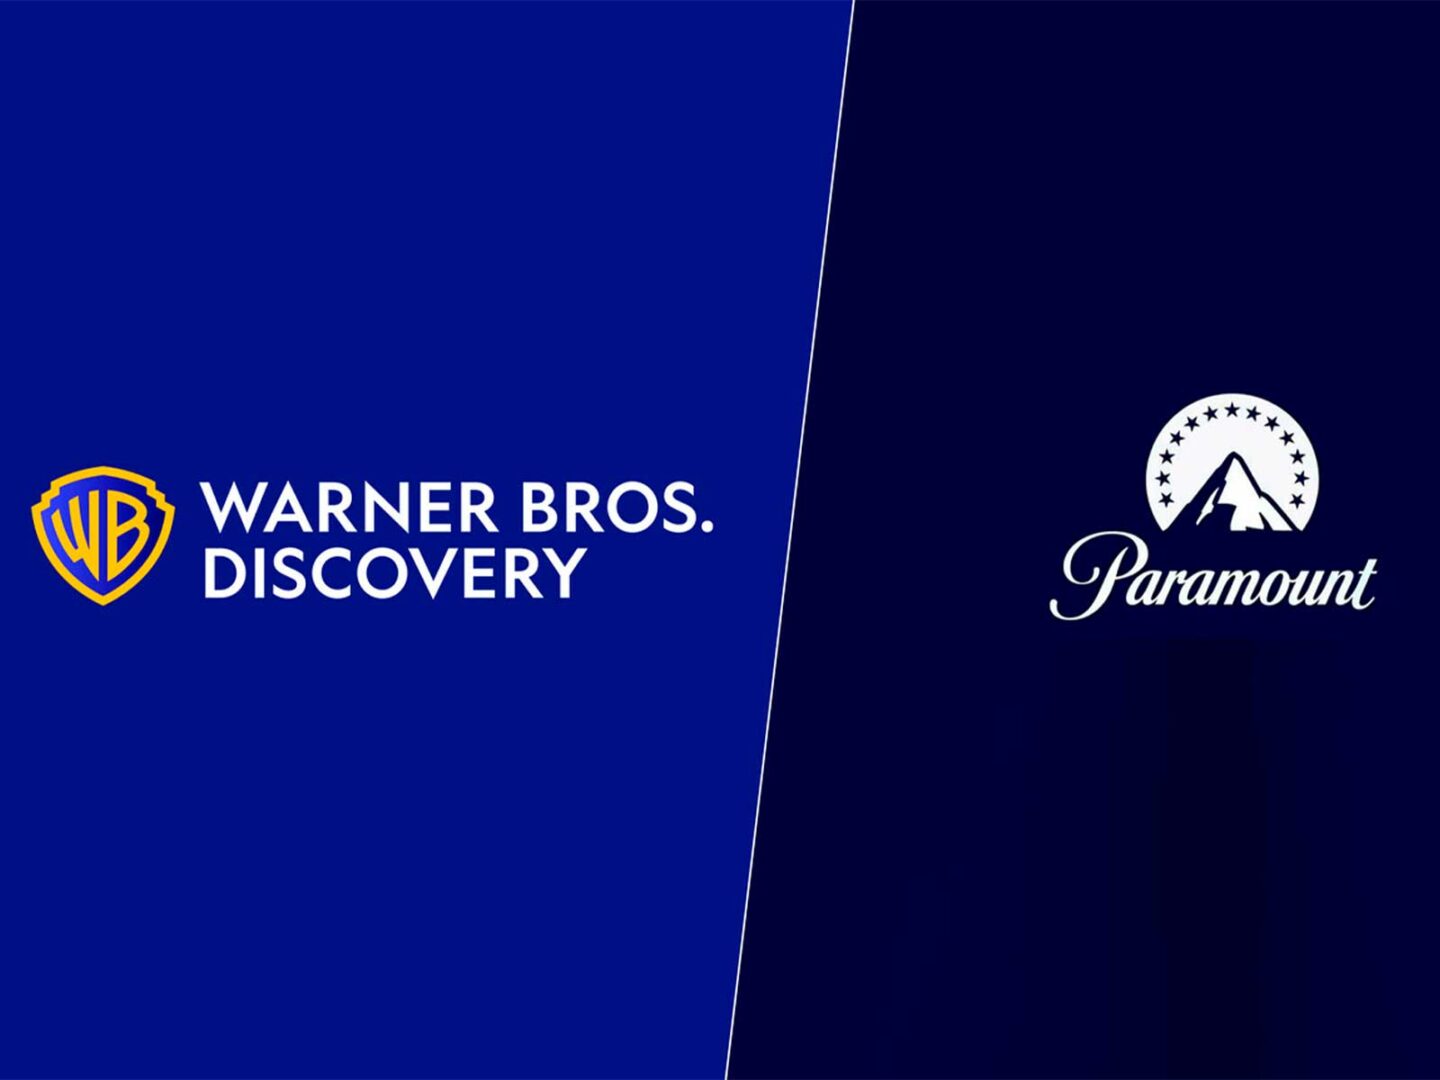 Warner Bros. Discovery and Paramount Global: a possible merger?